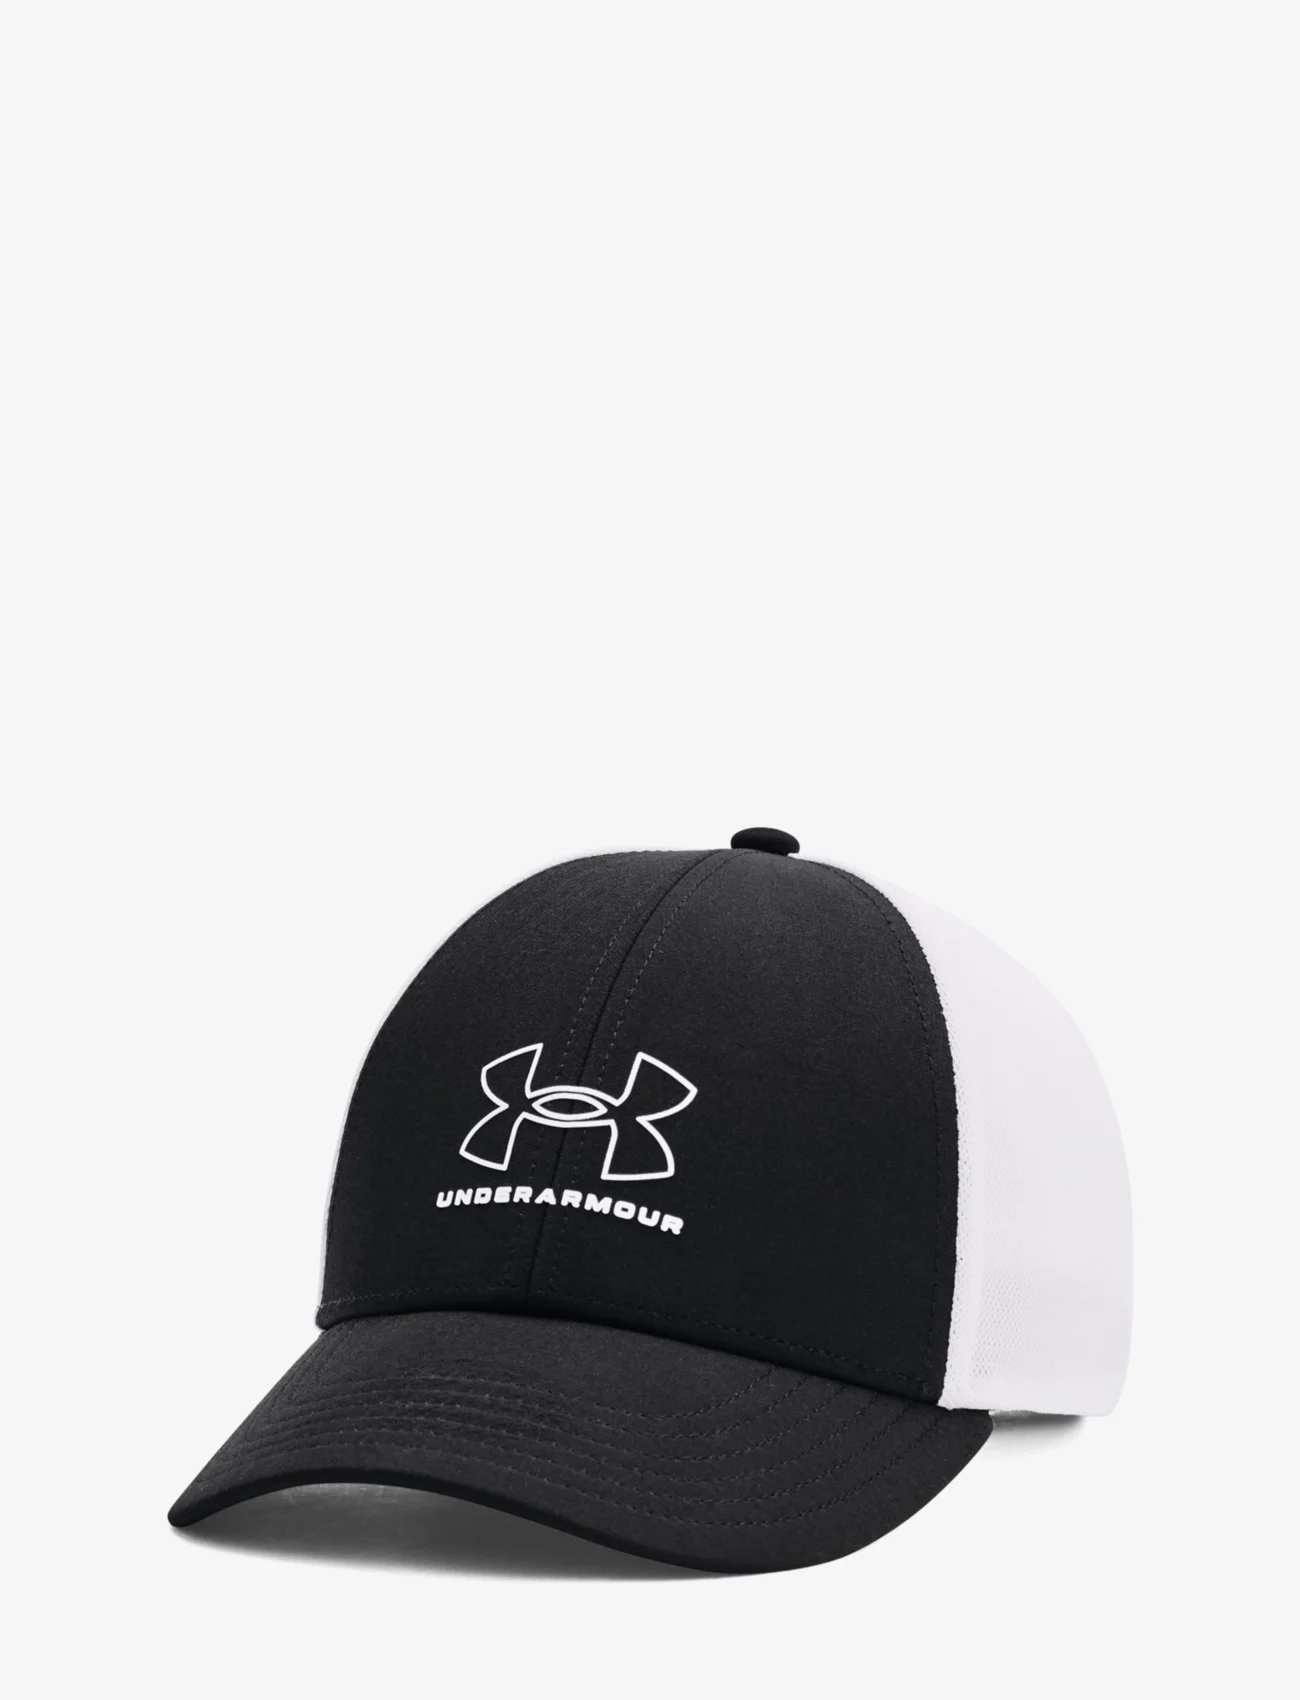 Under Armour - Iso-chill Driver Mesh Adj - caps - black - 0